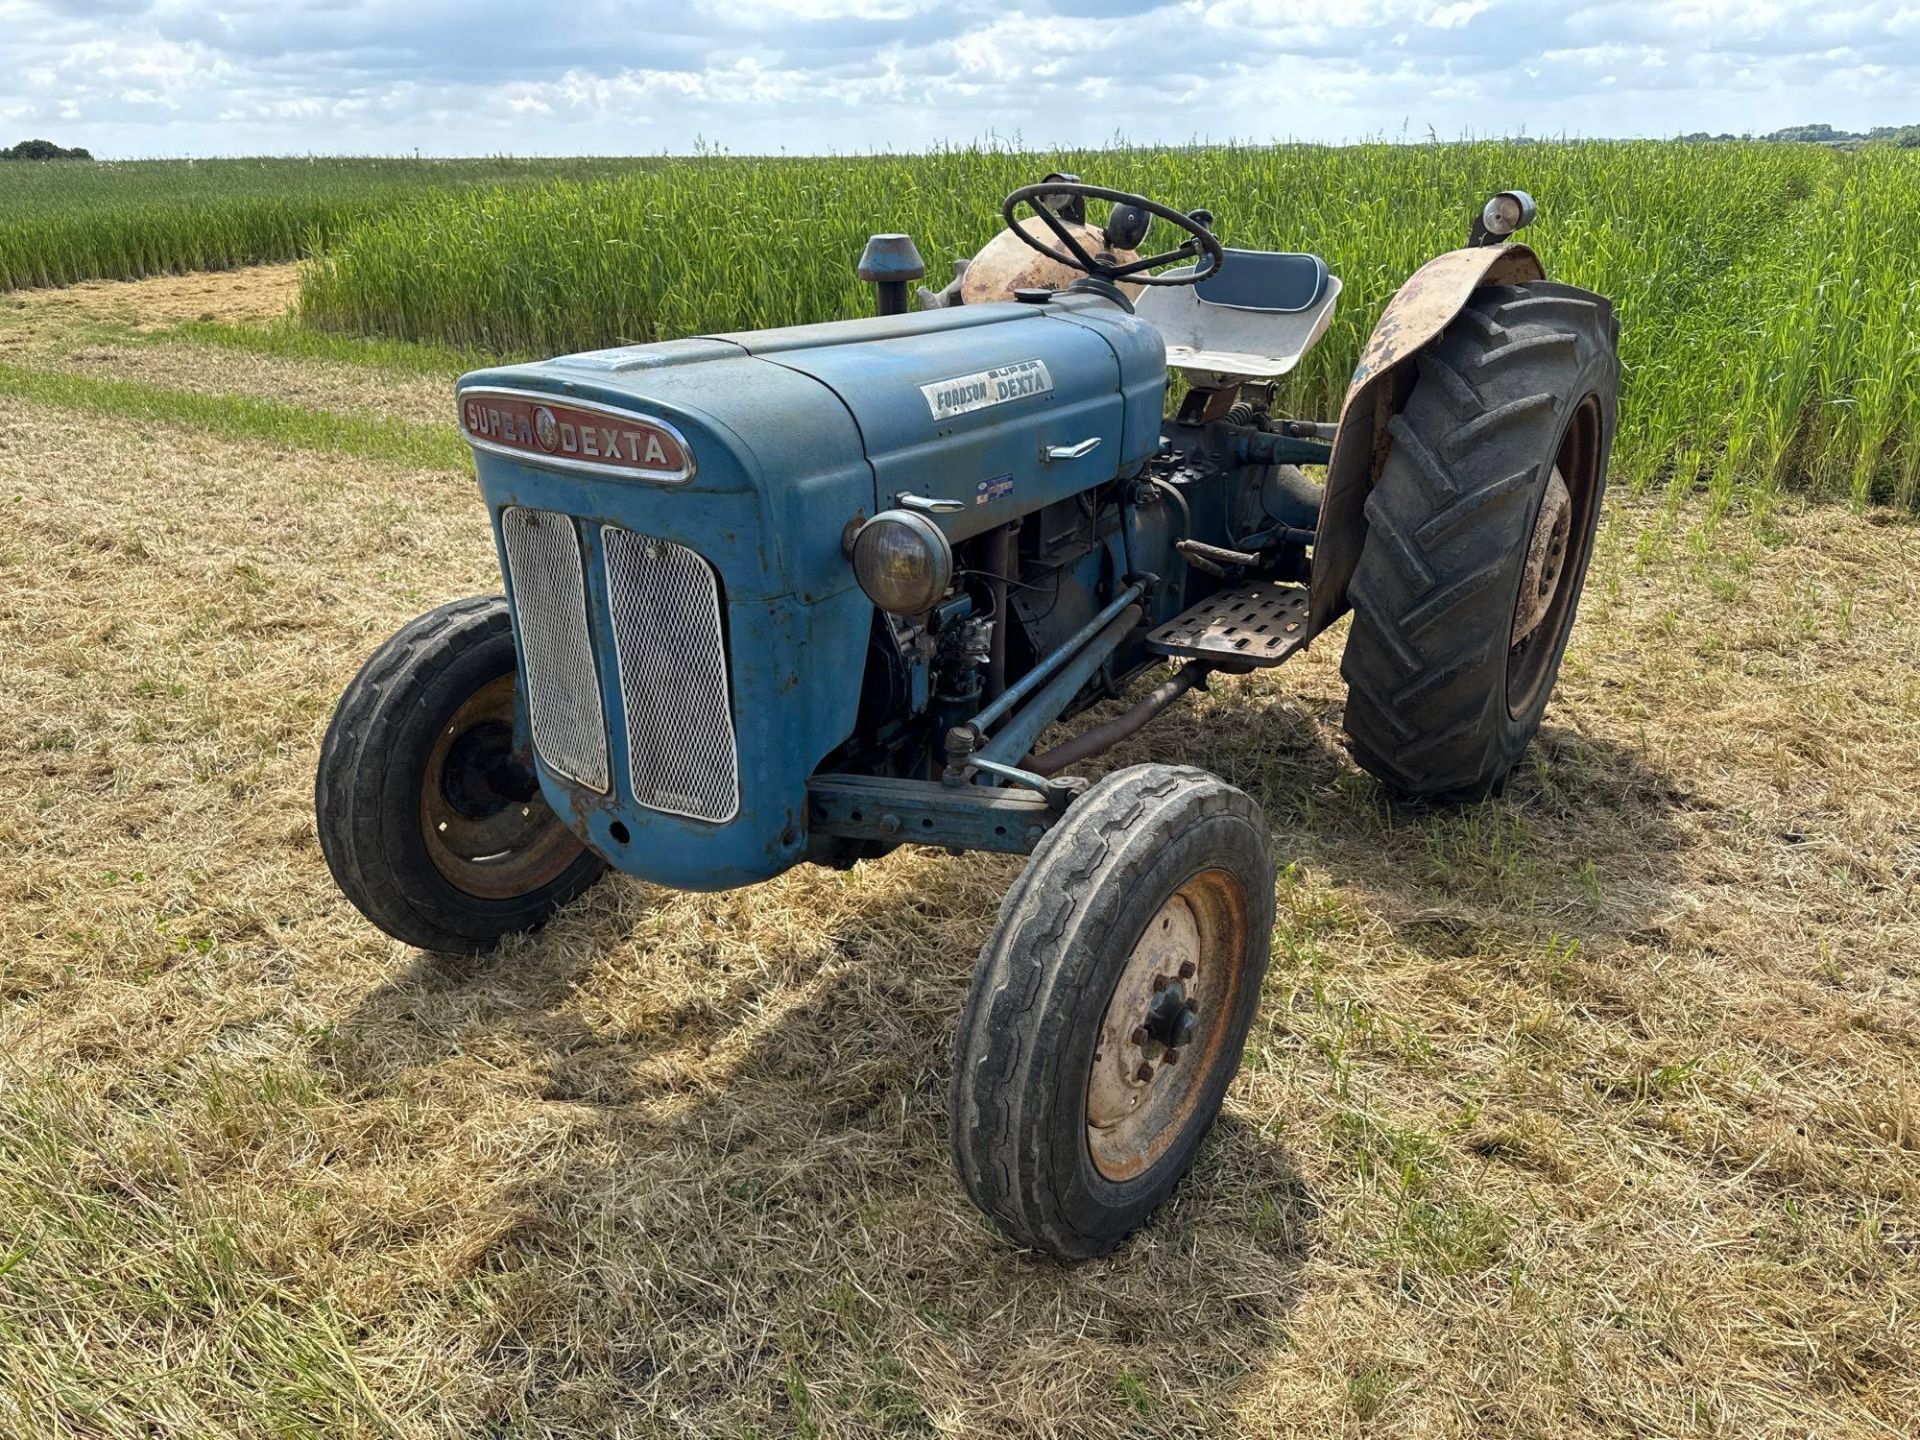 Fordson Super Dexta 2wd diesel tractor with rear linkage, PTO and underslung exhaust on 12.4-28 rear - Image 16 of 16